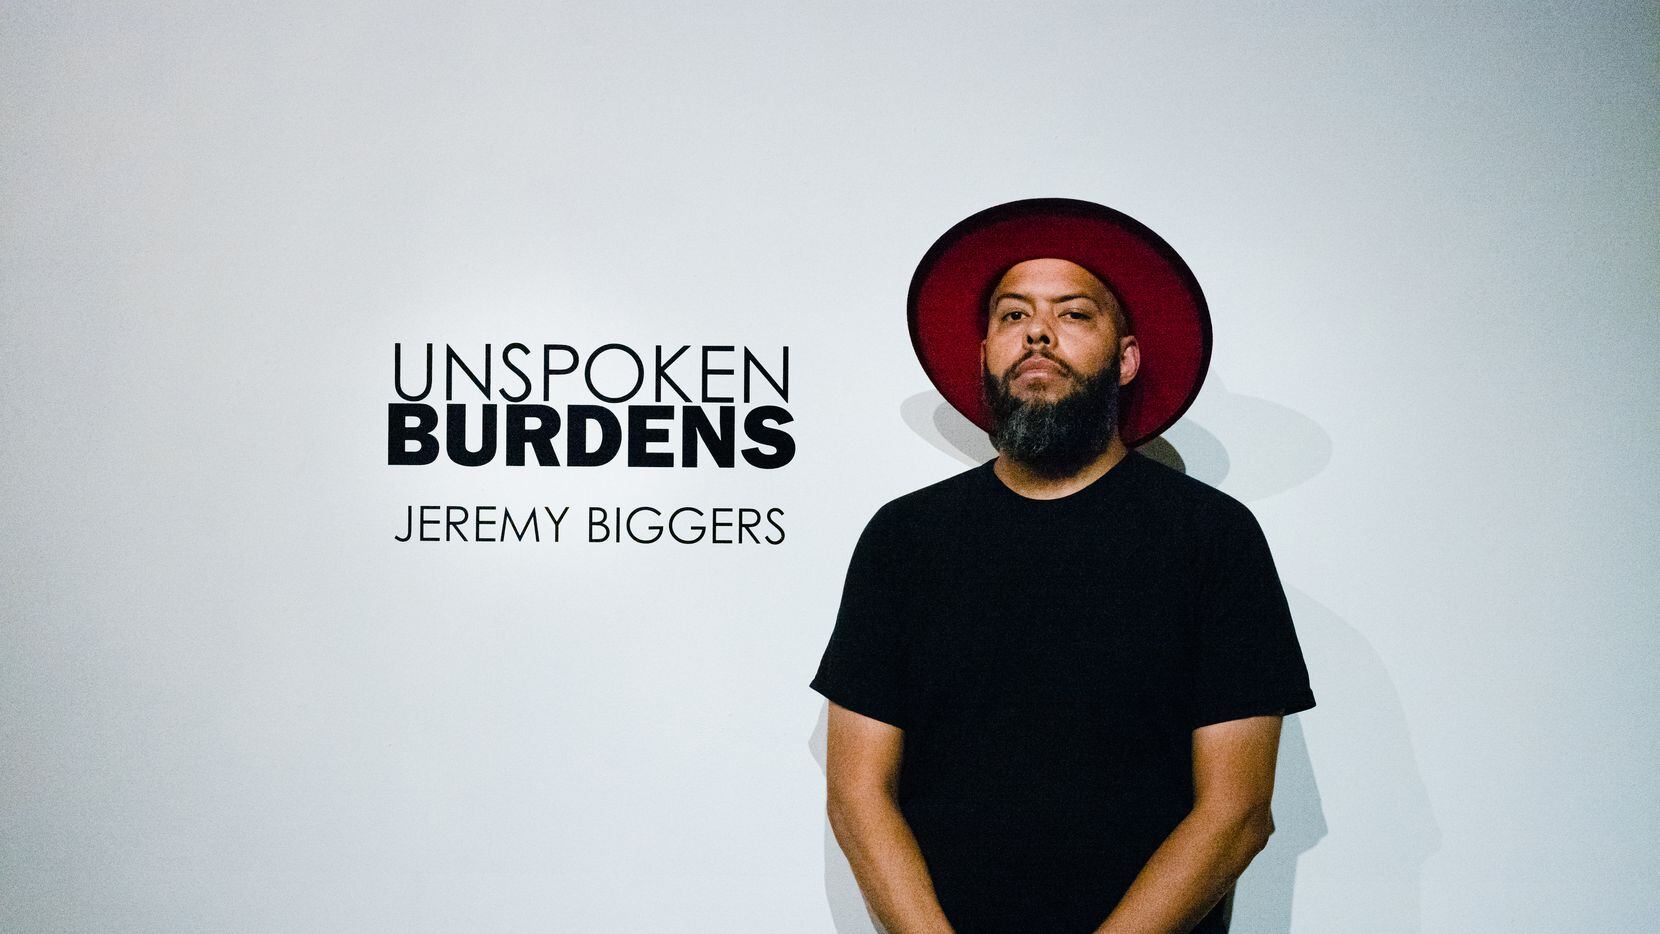 Jeremy Biggers, a South Dallas native, sets his sights on male identity and insecurity in...